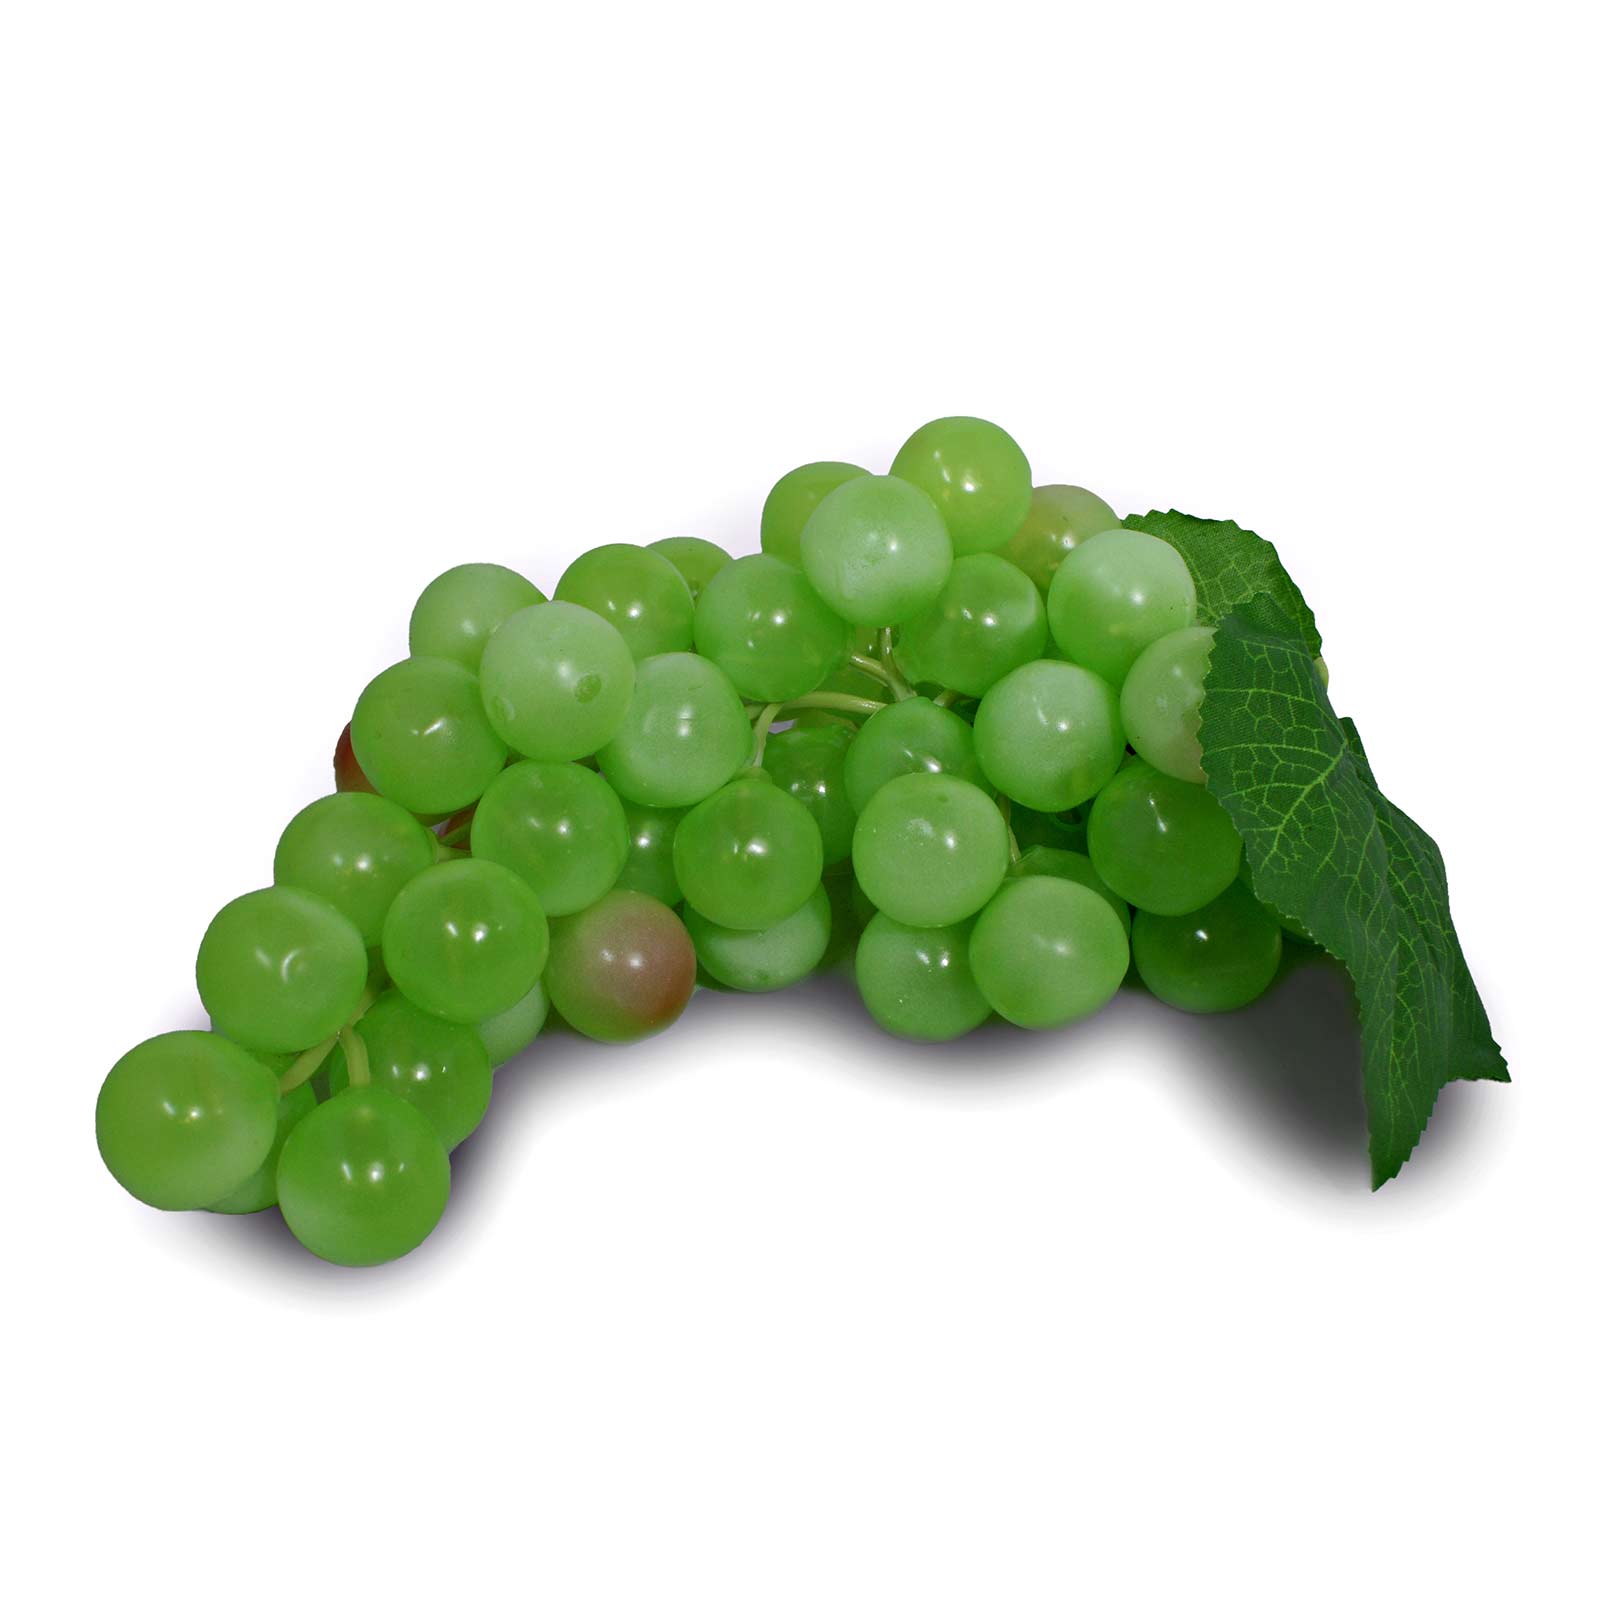 FF5 Artificial Bunch Of Grapes Realistic Fake Fruit Retail Display Prop